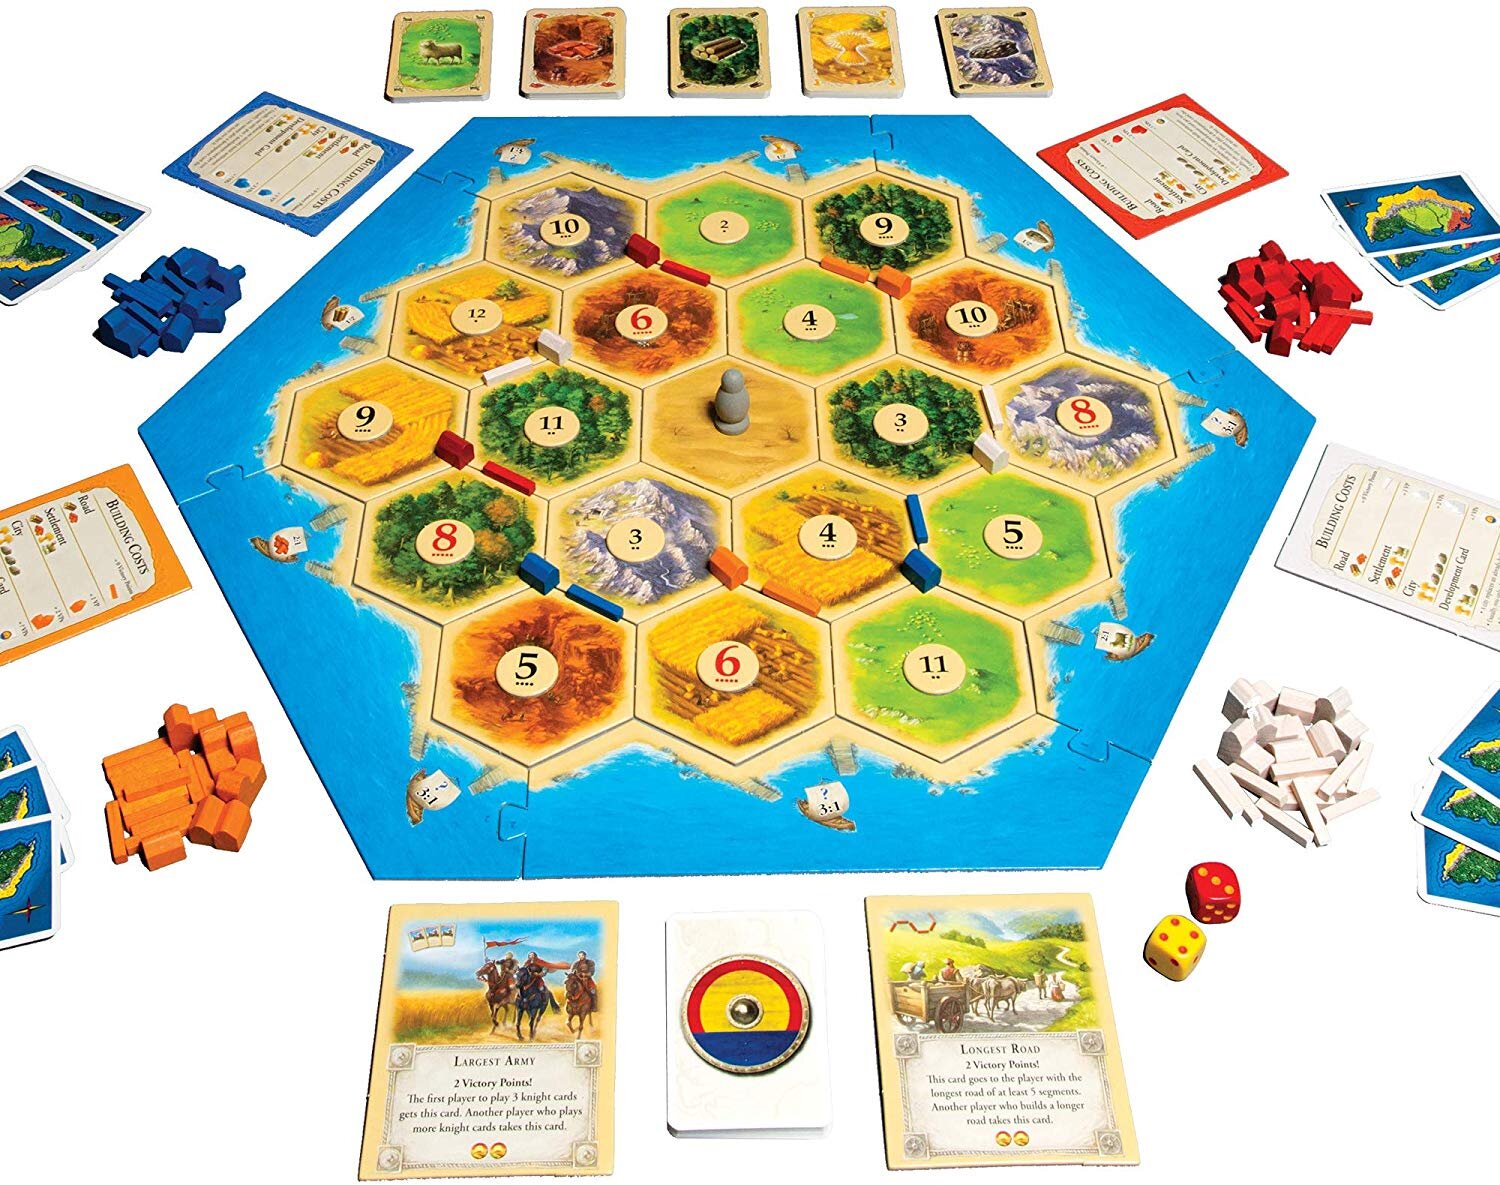 Play Online Board Games With Family Near & Far